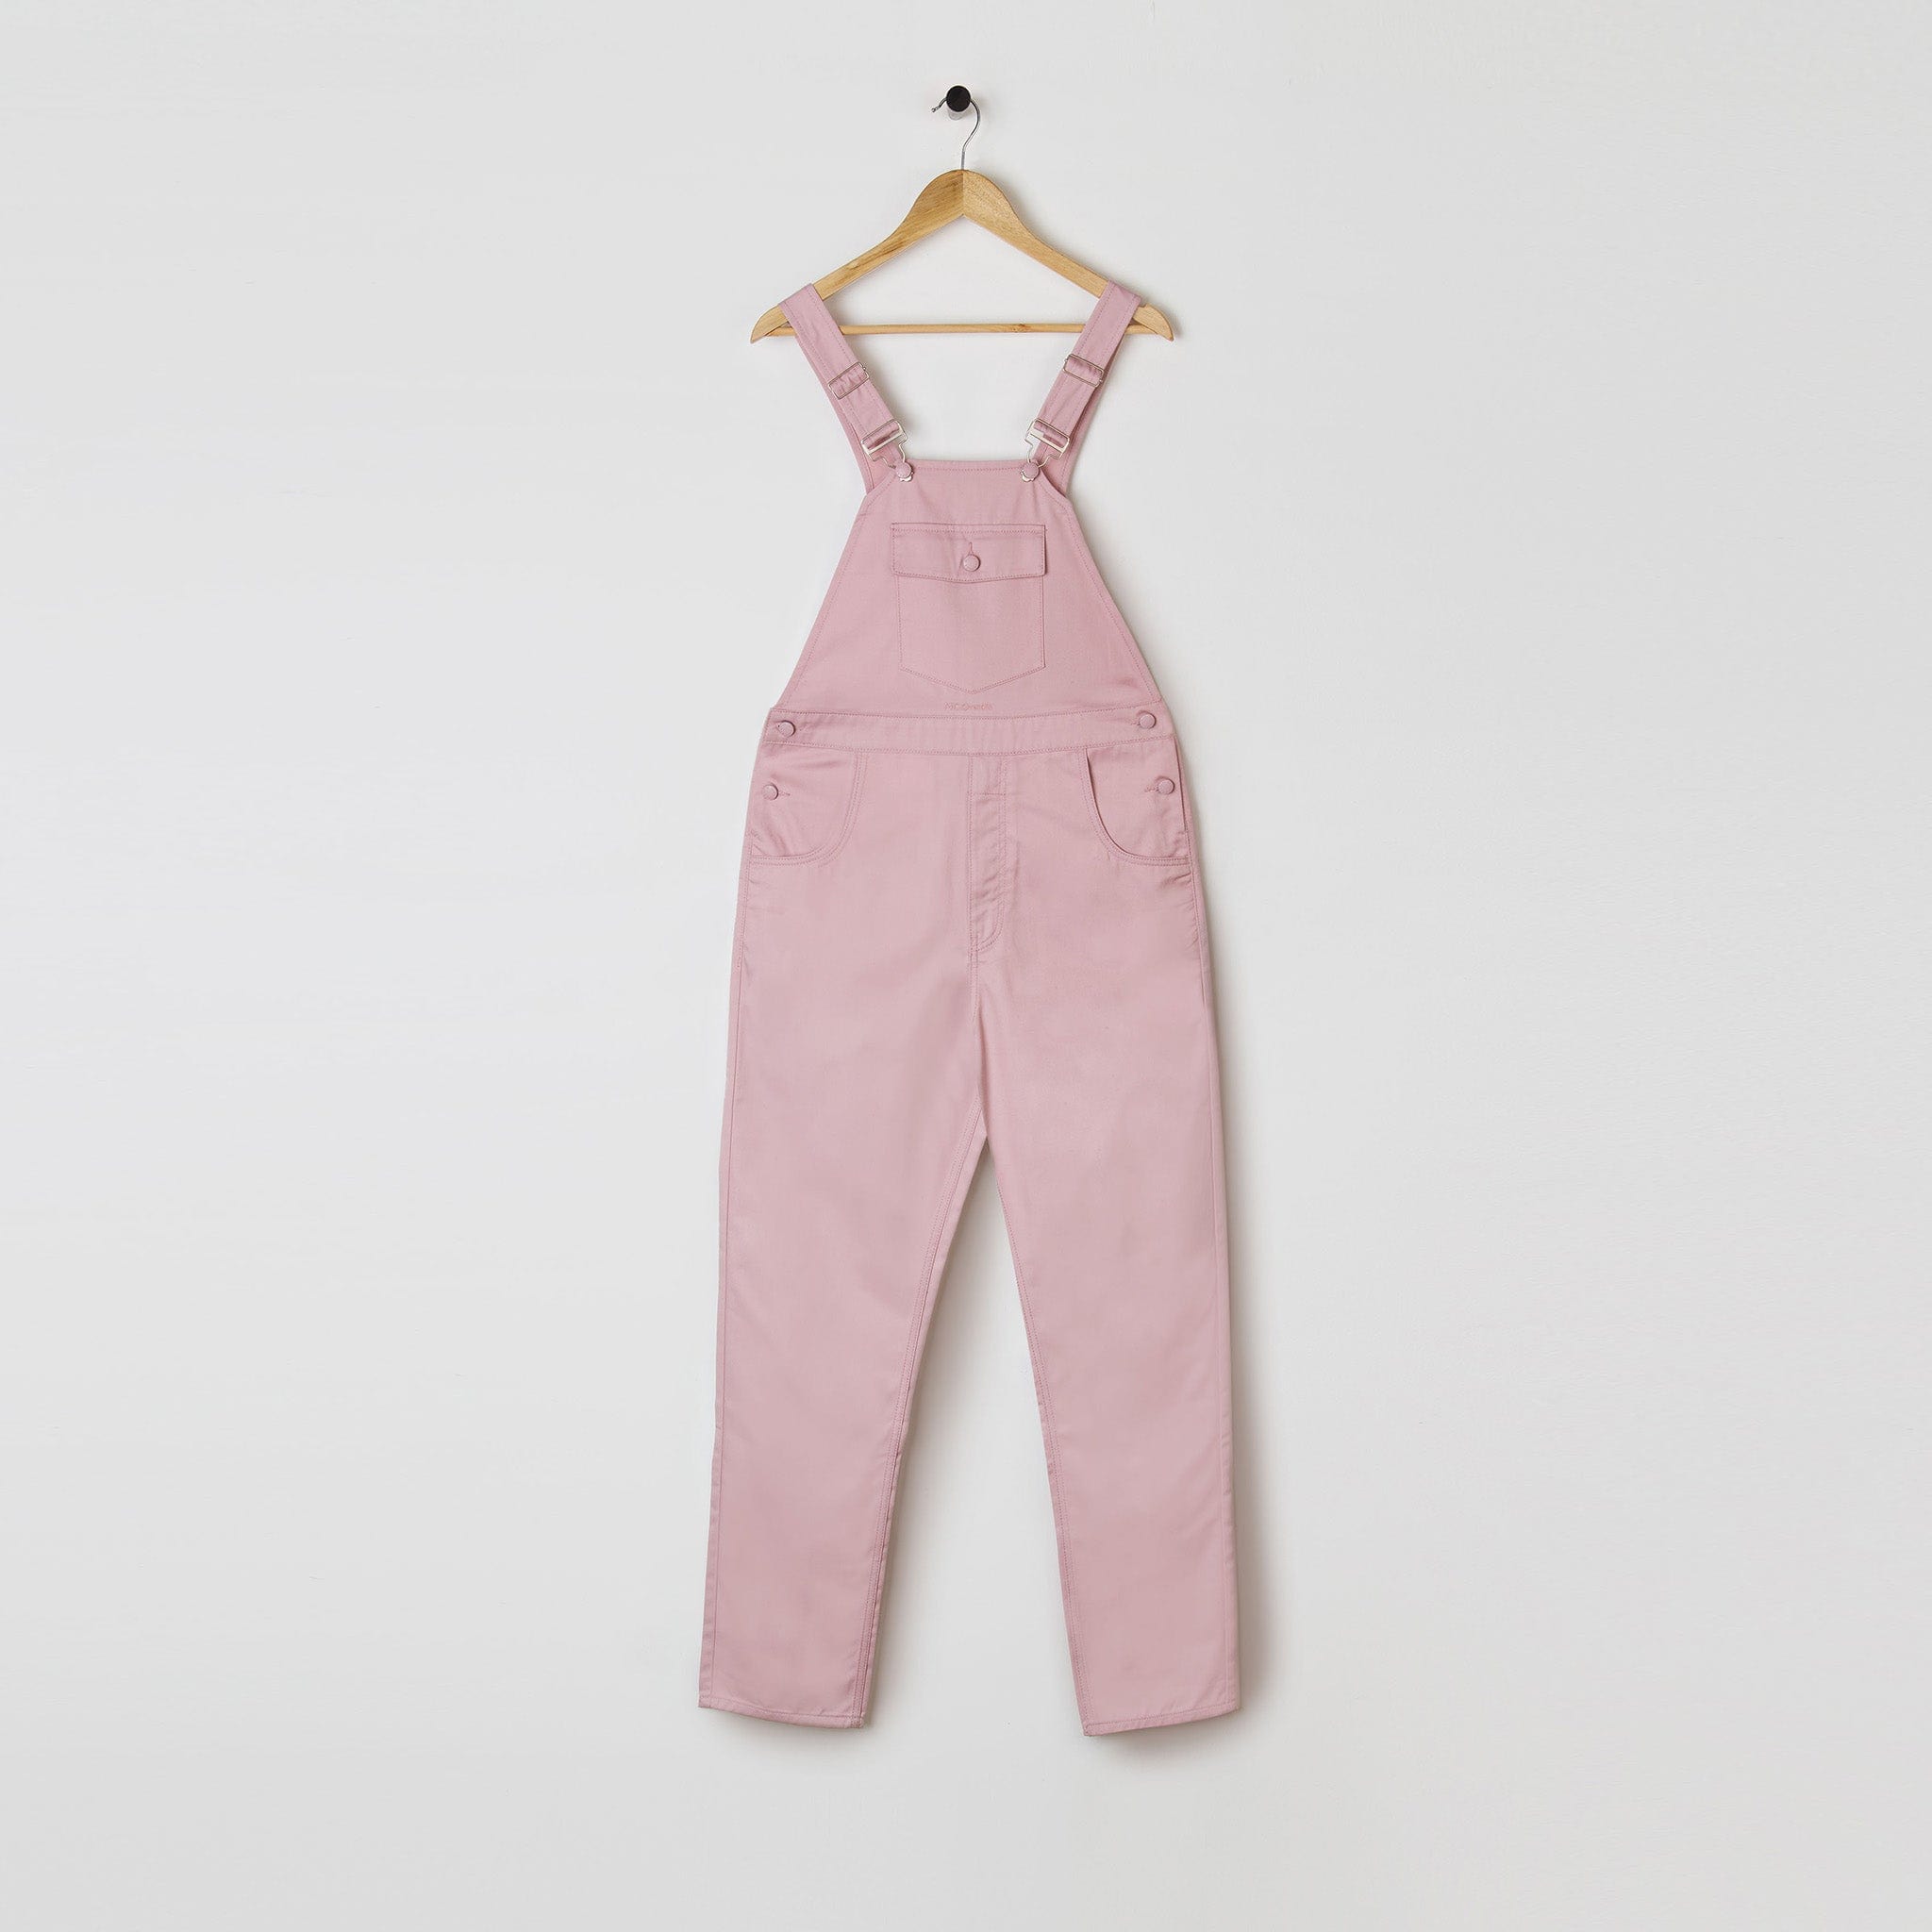 M.C.O's Pink Polycotton Dungarees in Soho, London.